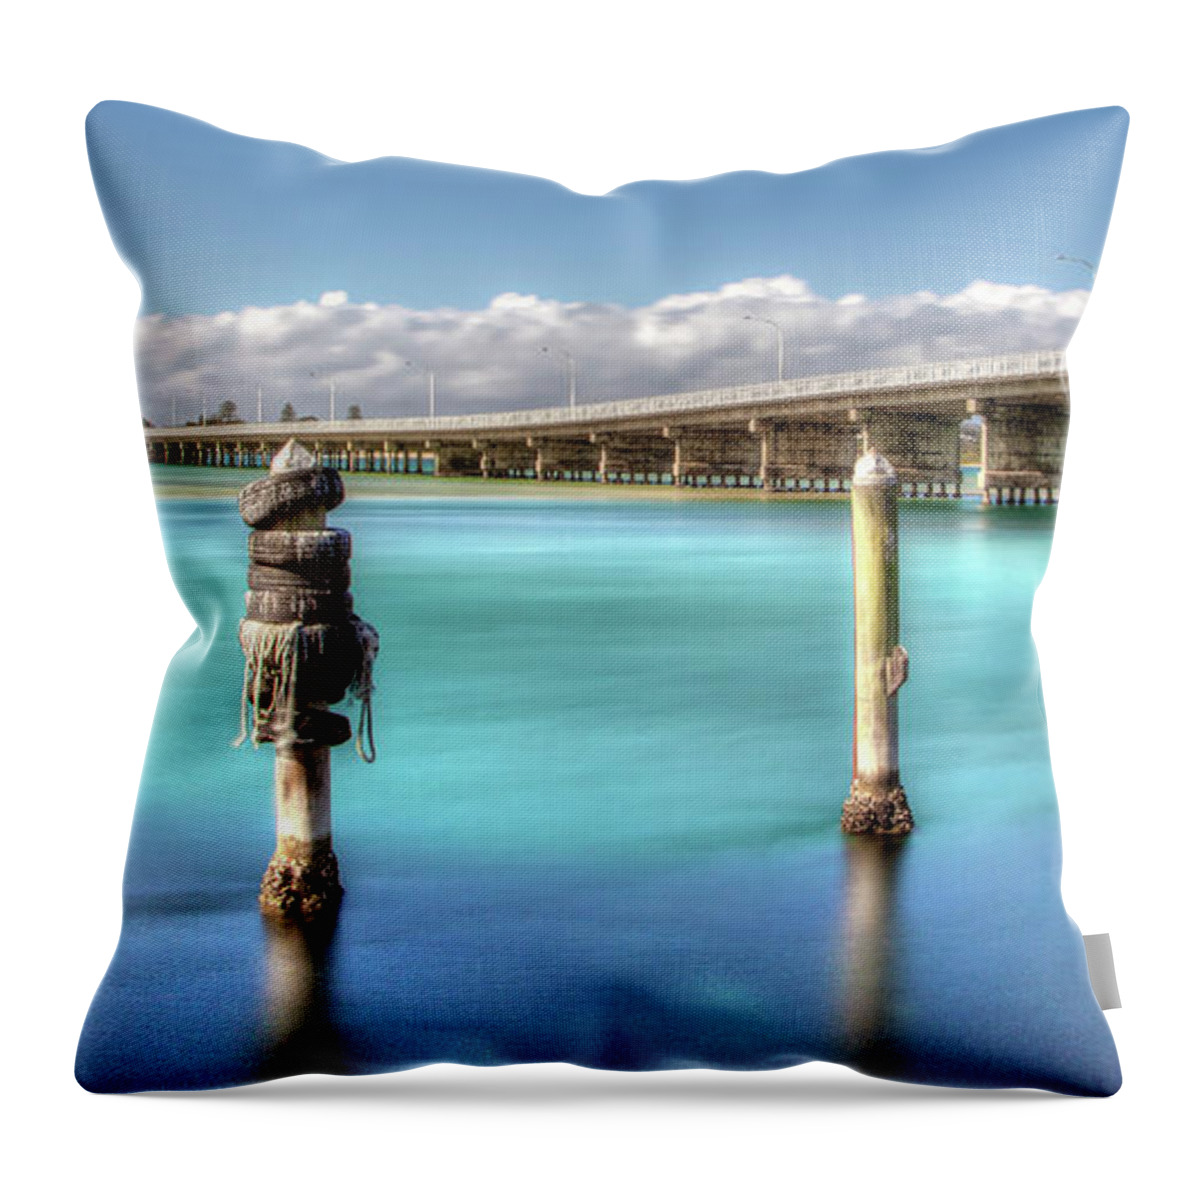 Tuncurry Photography Throw Pillow featuring the digital art Crystal waters 0517 by Kevin Chippindall